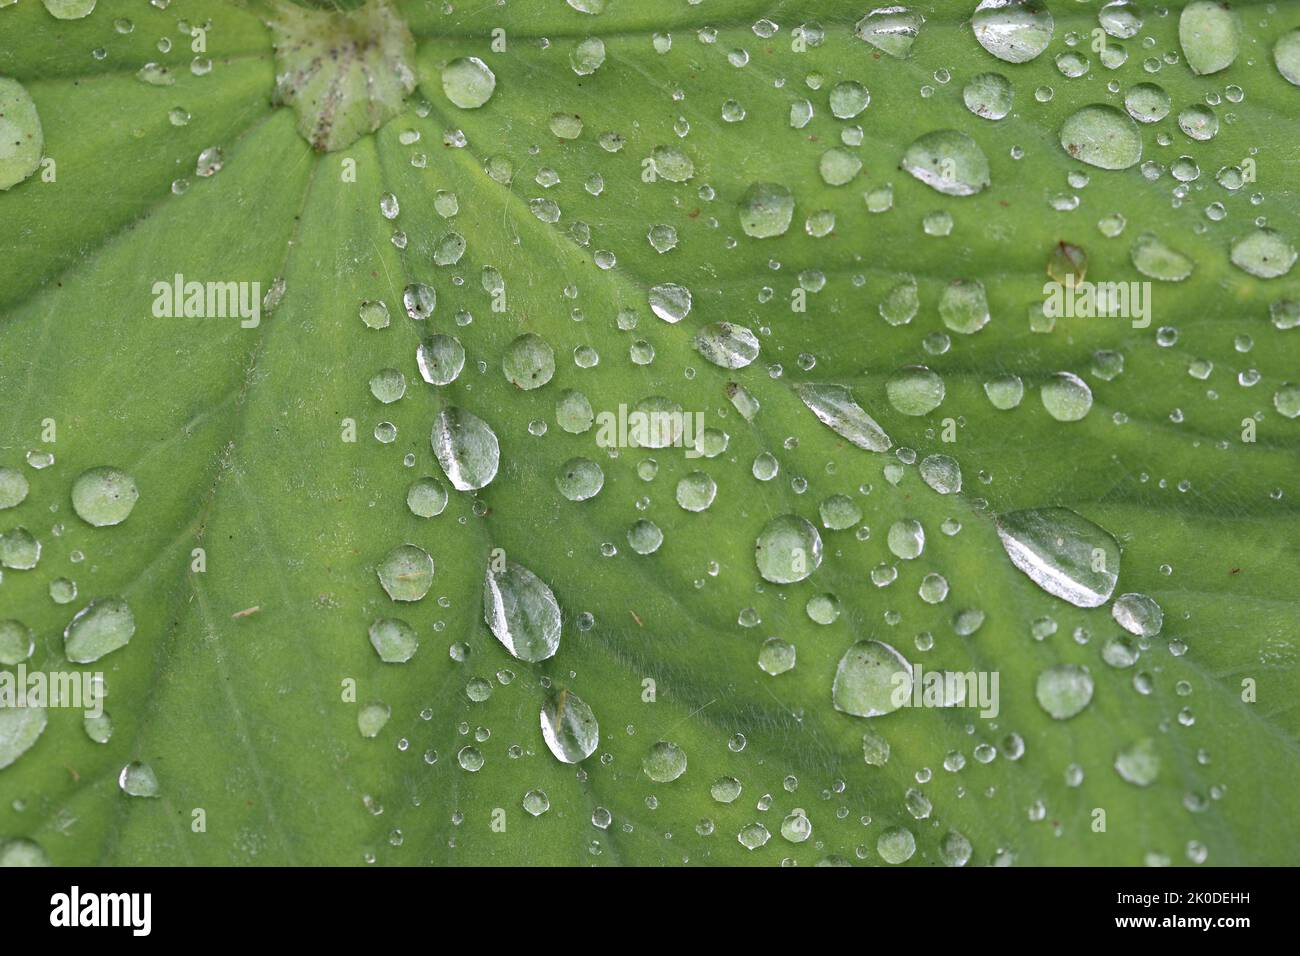 Ladys mantle, Alchemilla mollis, leaves in close up with raindrops and a background of blurred leaves. Stock Photo